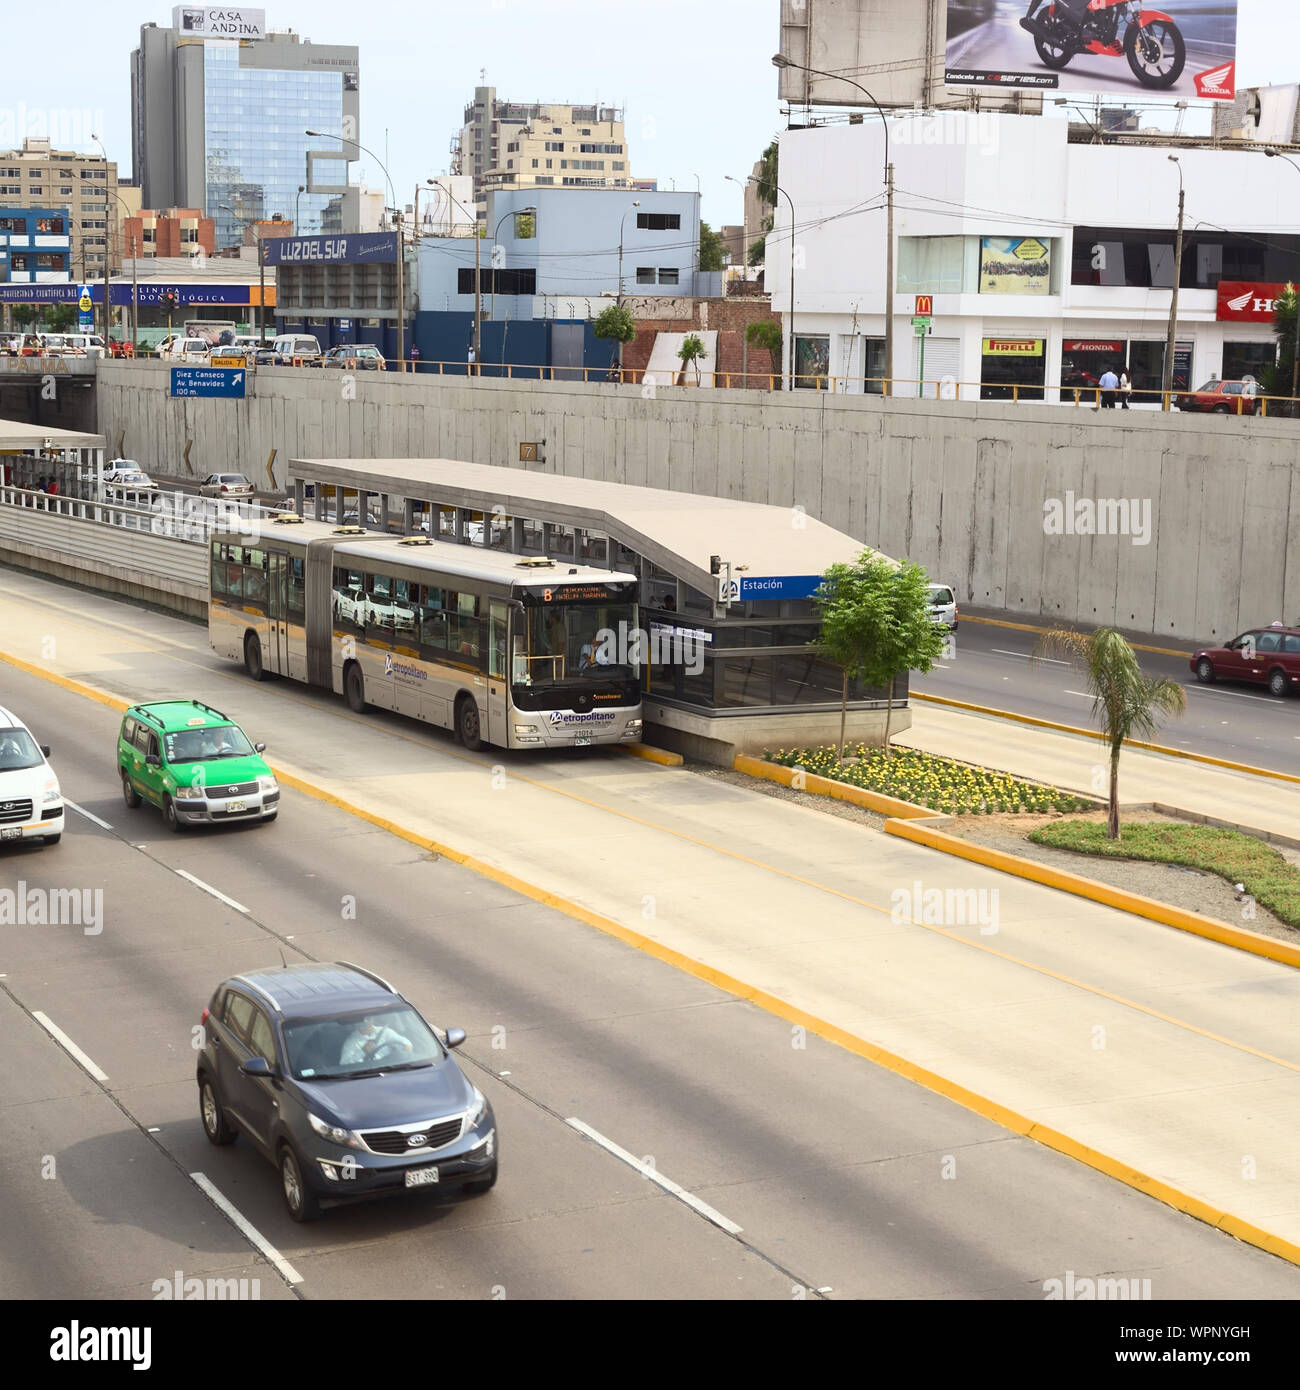 LIMA, PERU - FEBRUARY 13, 2012: Metropolitano bus of the Line B stopping at the crossing of the Avenues Ricardo Palma and Paseo de la Republica Stock Photo